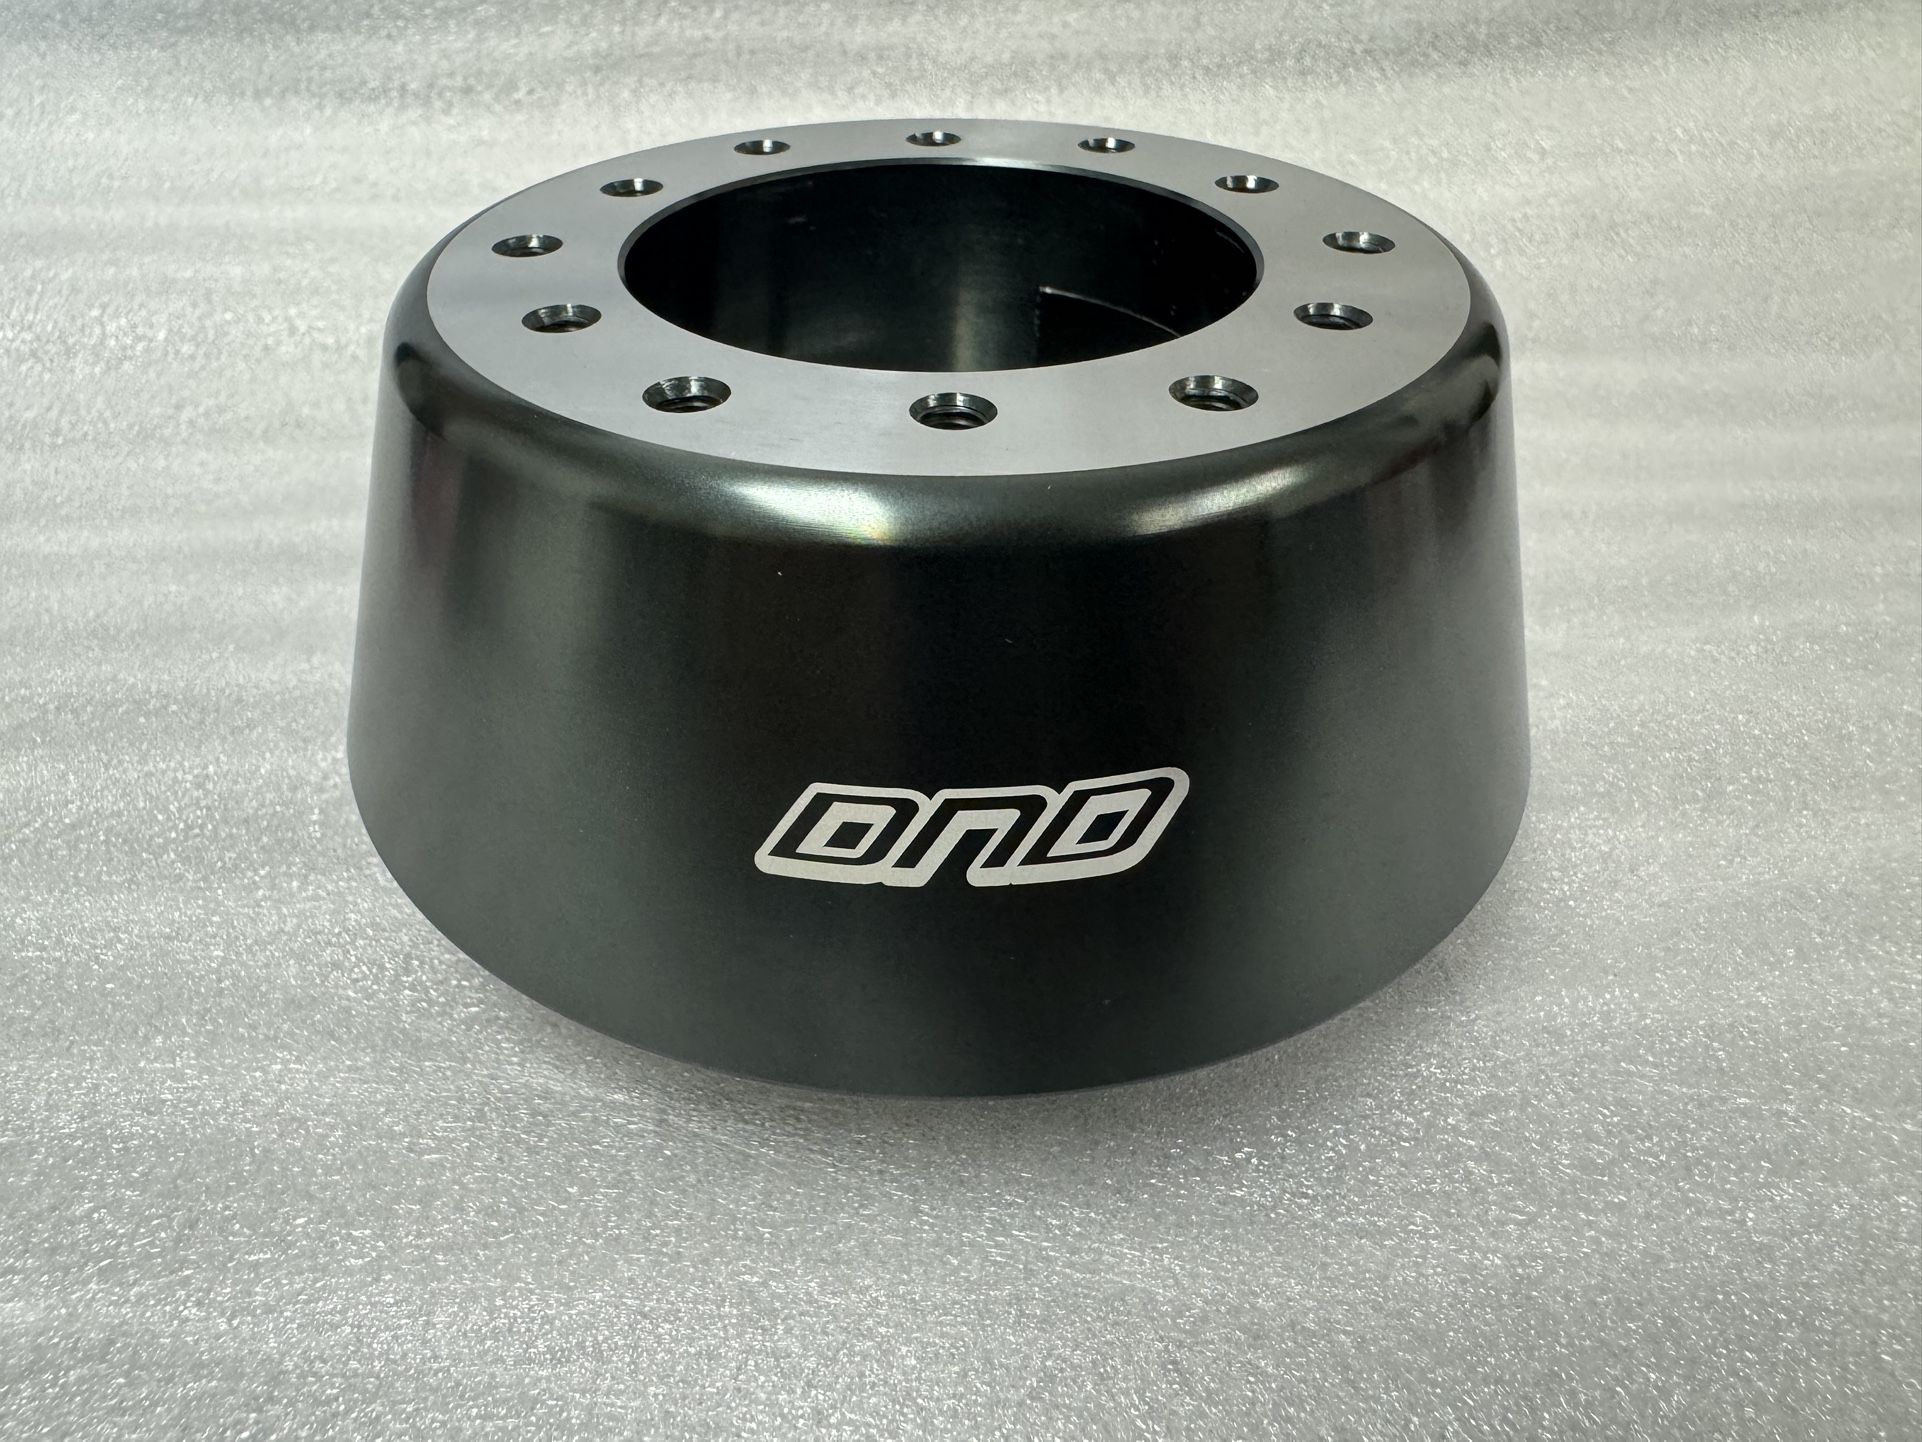 DND Performance Interior Low Profile Hub Kit For Nissan (NS3) 350Z 370Z G35 G37